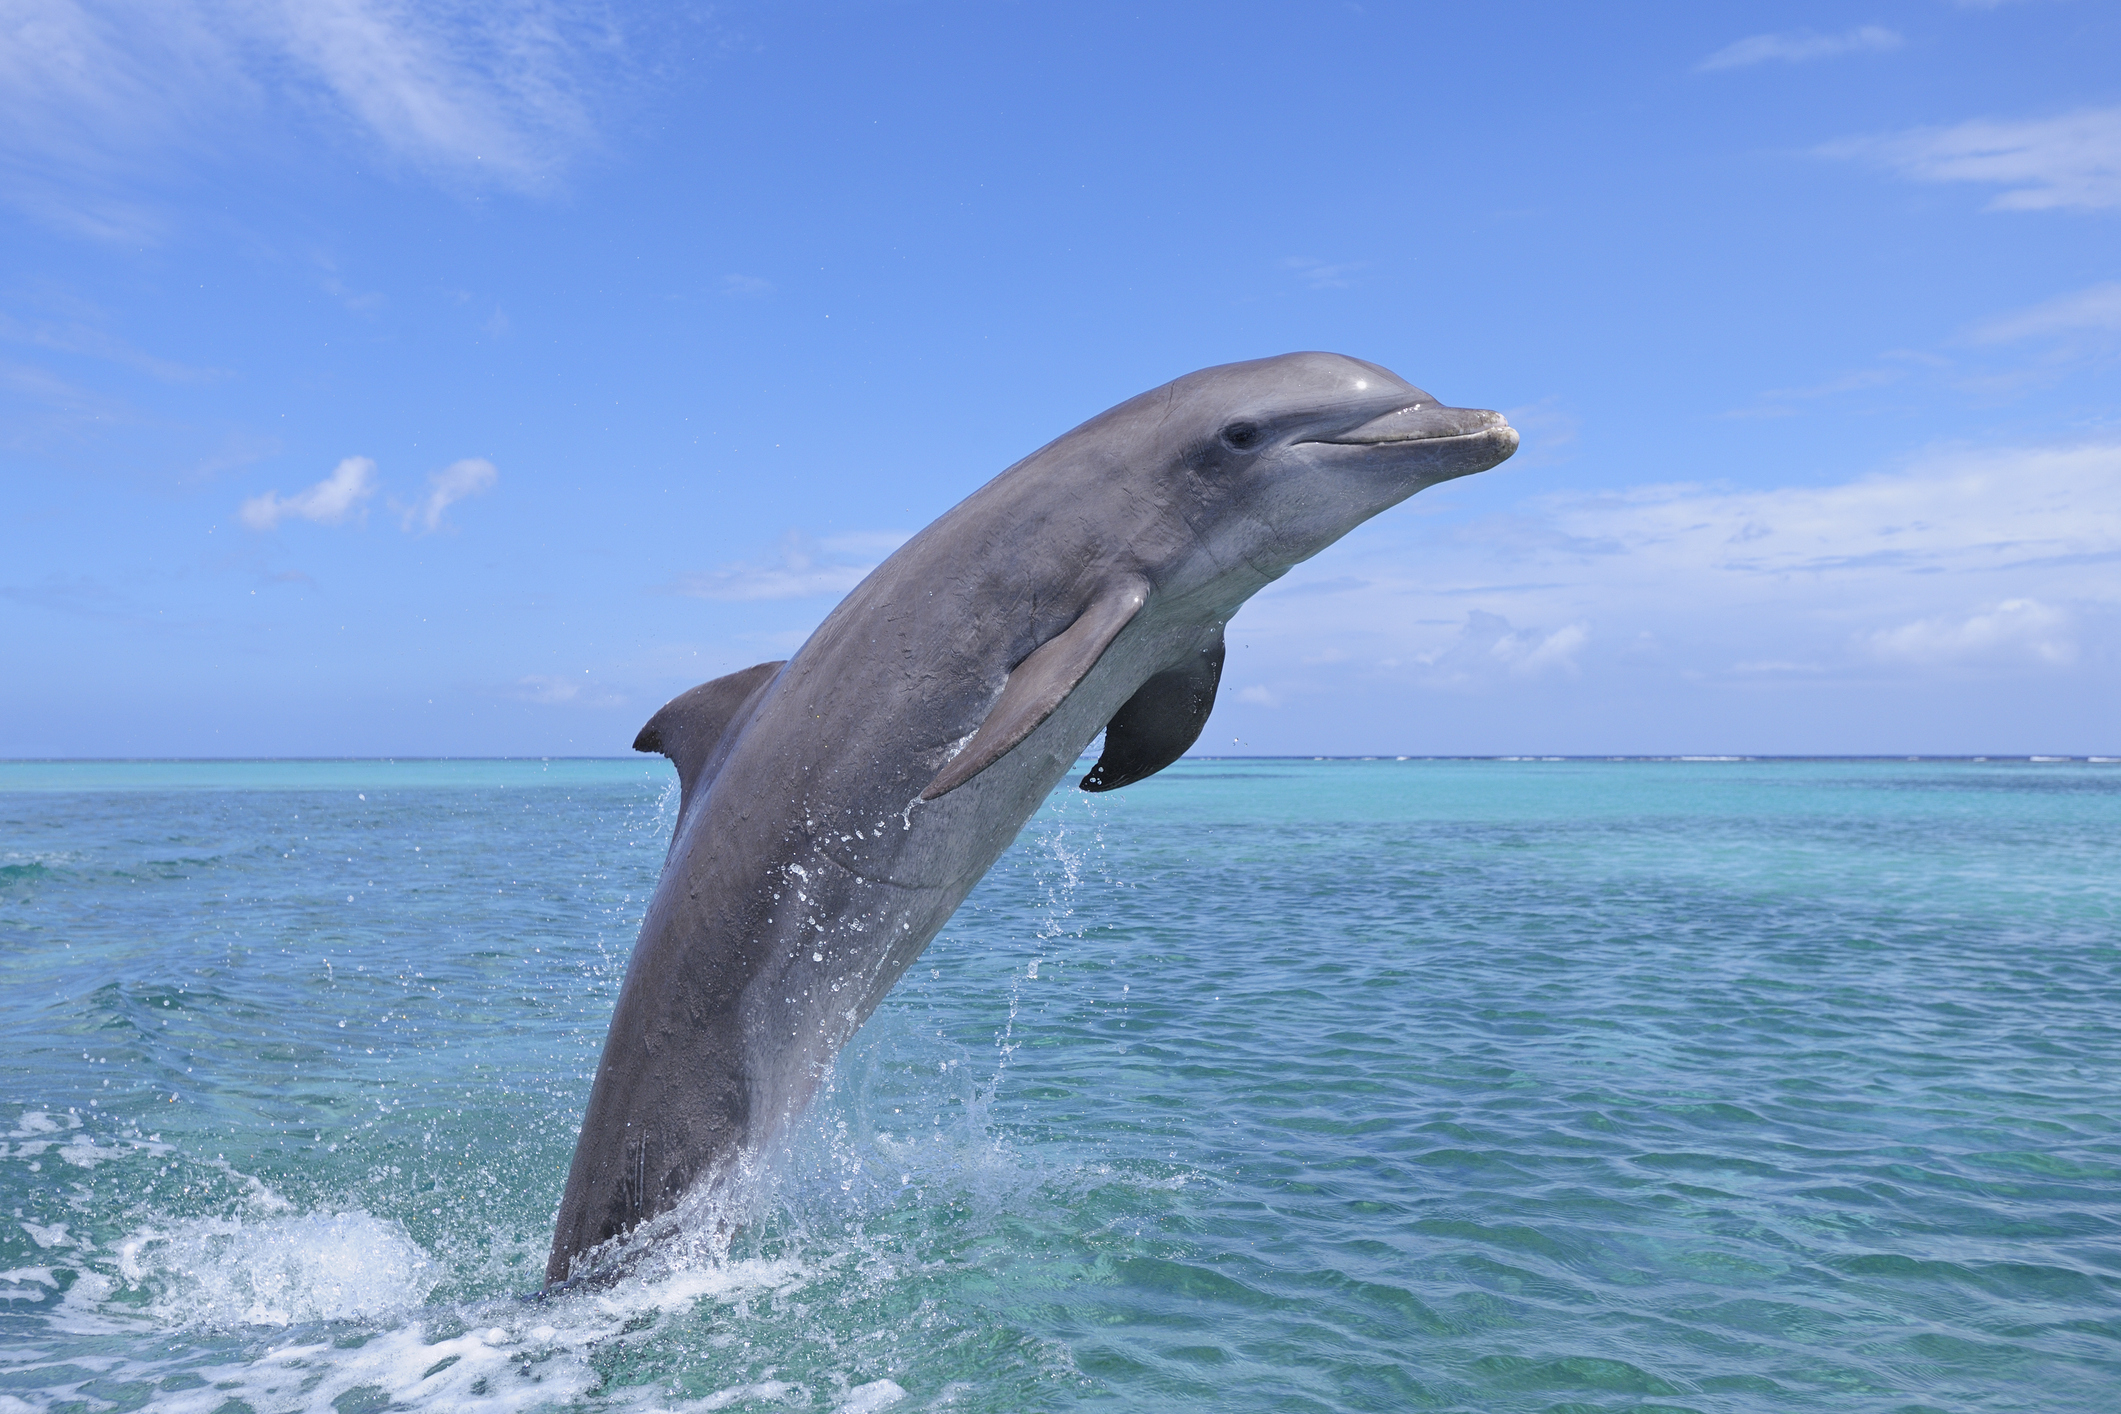 Dolphin leaping out of the ocean waters